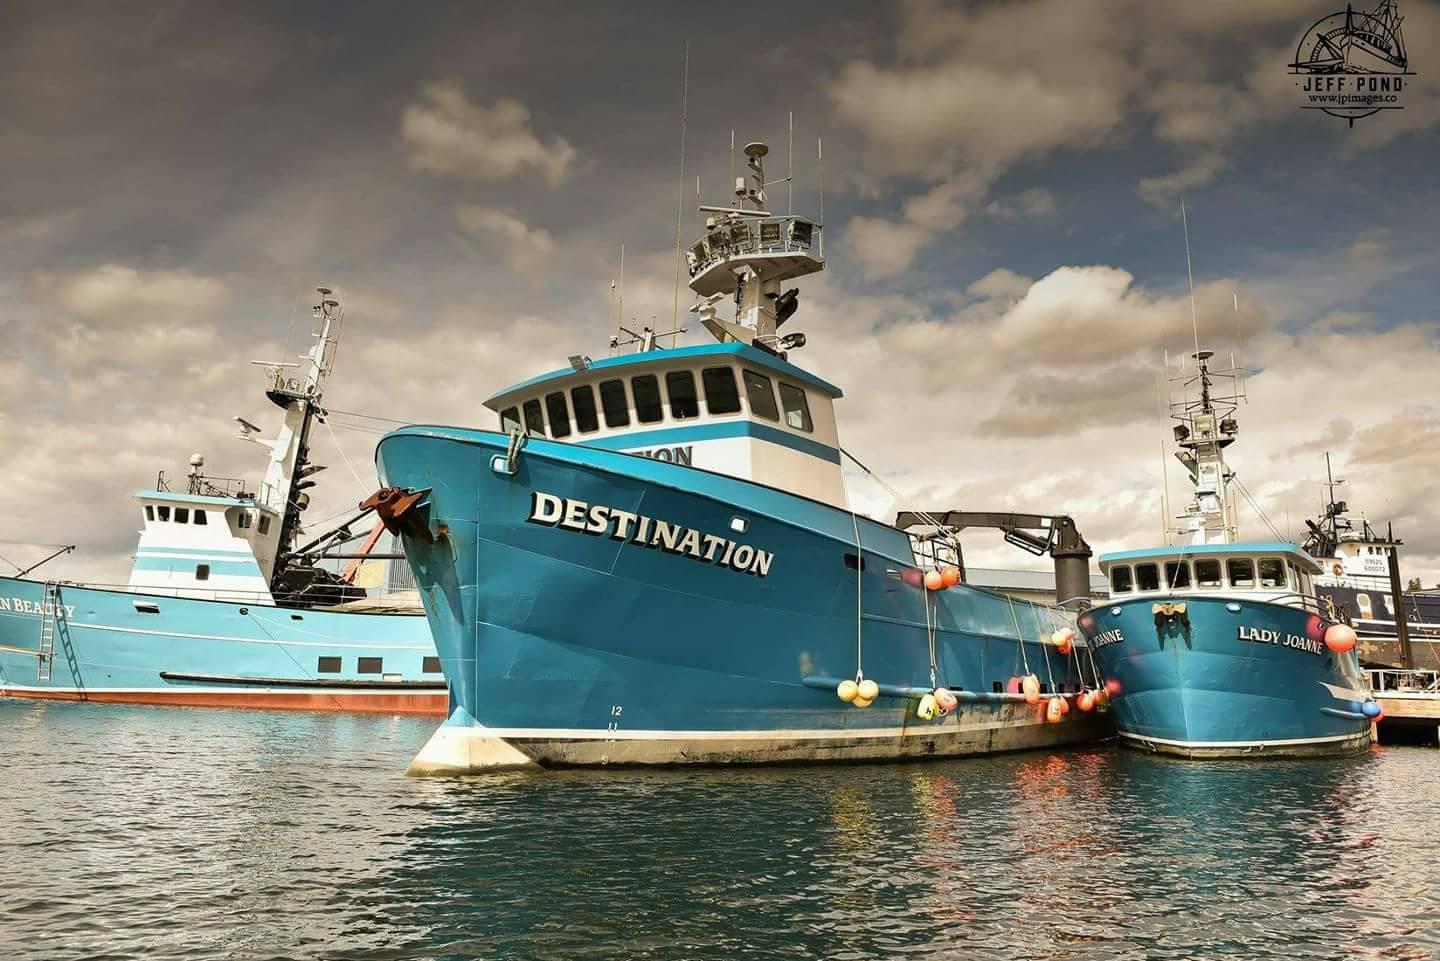 Six F/V Destination crew members died when their boat disappeared in February near St. George Island, marking the deadliest accident in more than a decade for the Bering Sea crab fleet. The Coast Guard is holding public hearings as part of its investigation into the Destination's sinking. (Photo courtesy F/V Destination Memorial Fund)